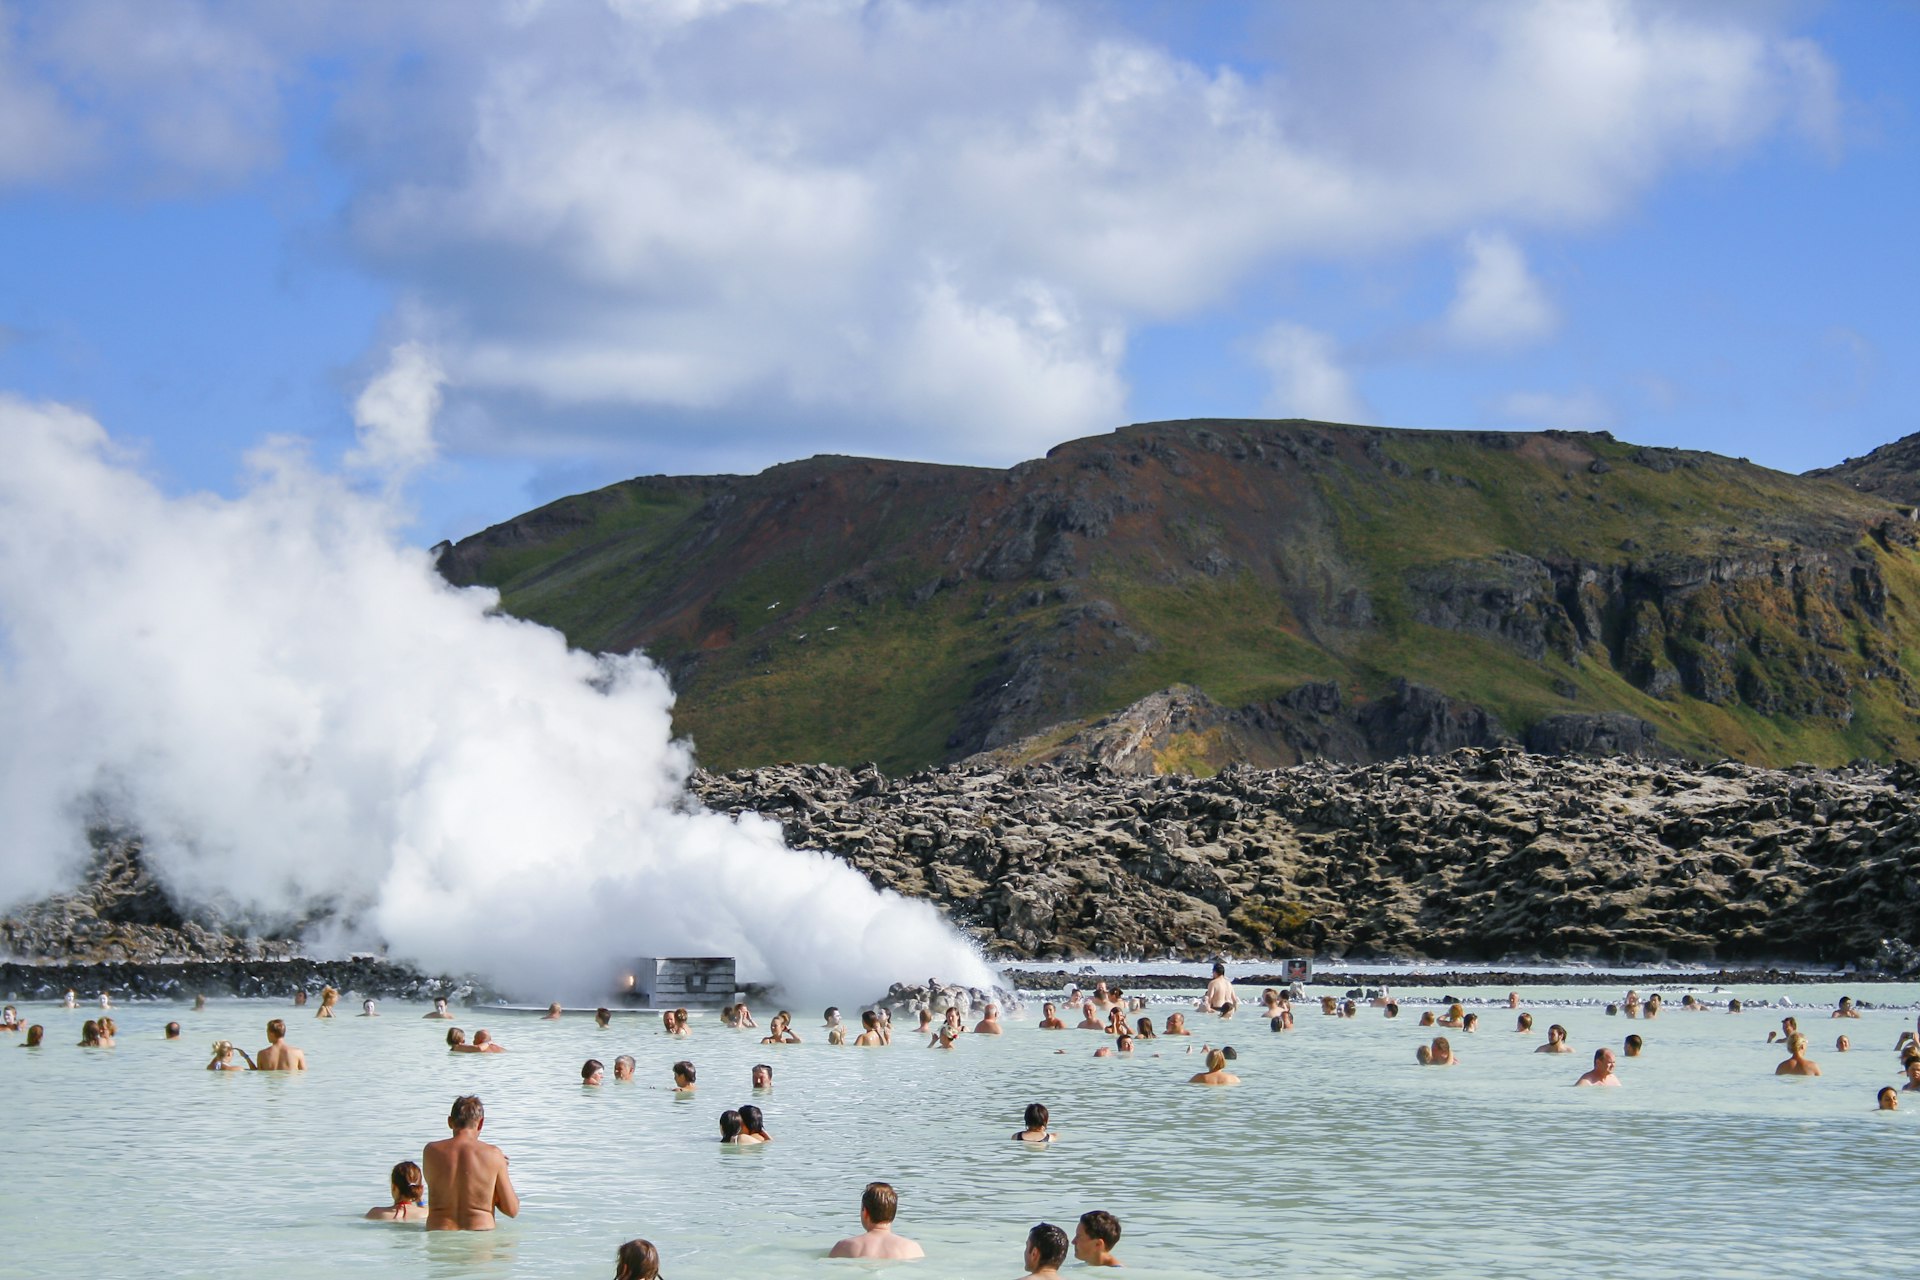 Bathers in a hot spring surrounded by rocky edges